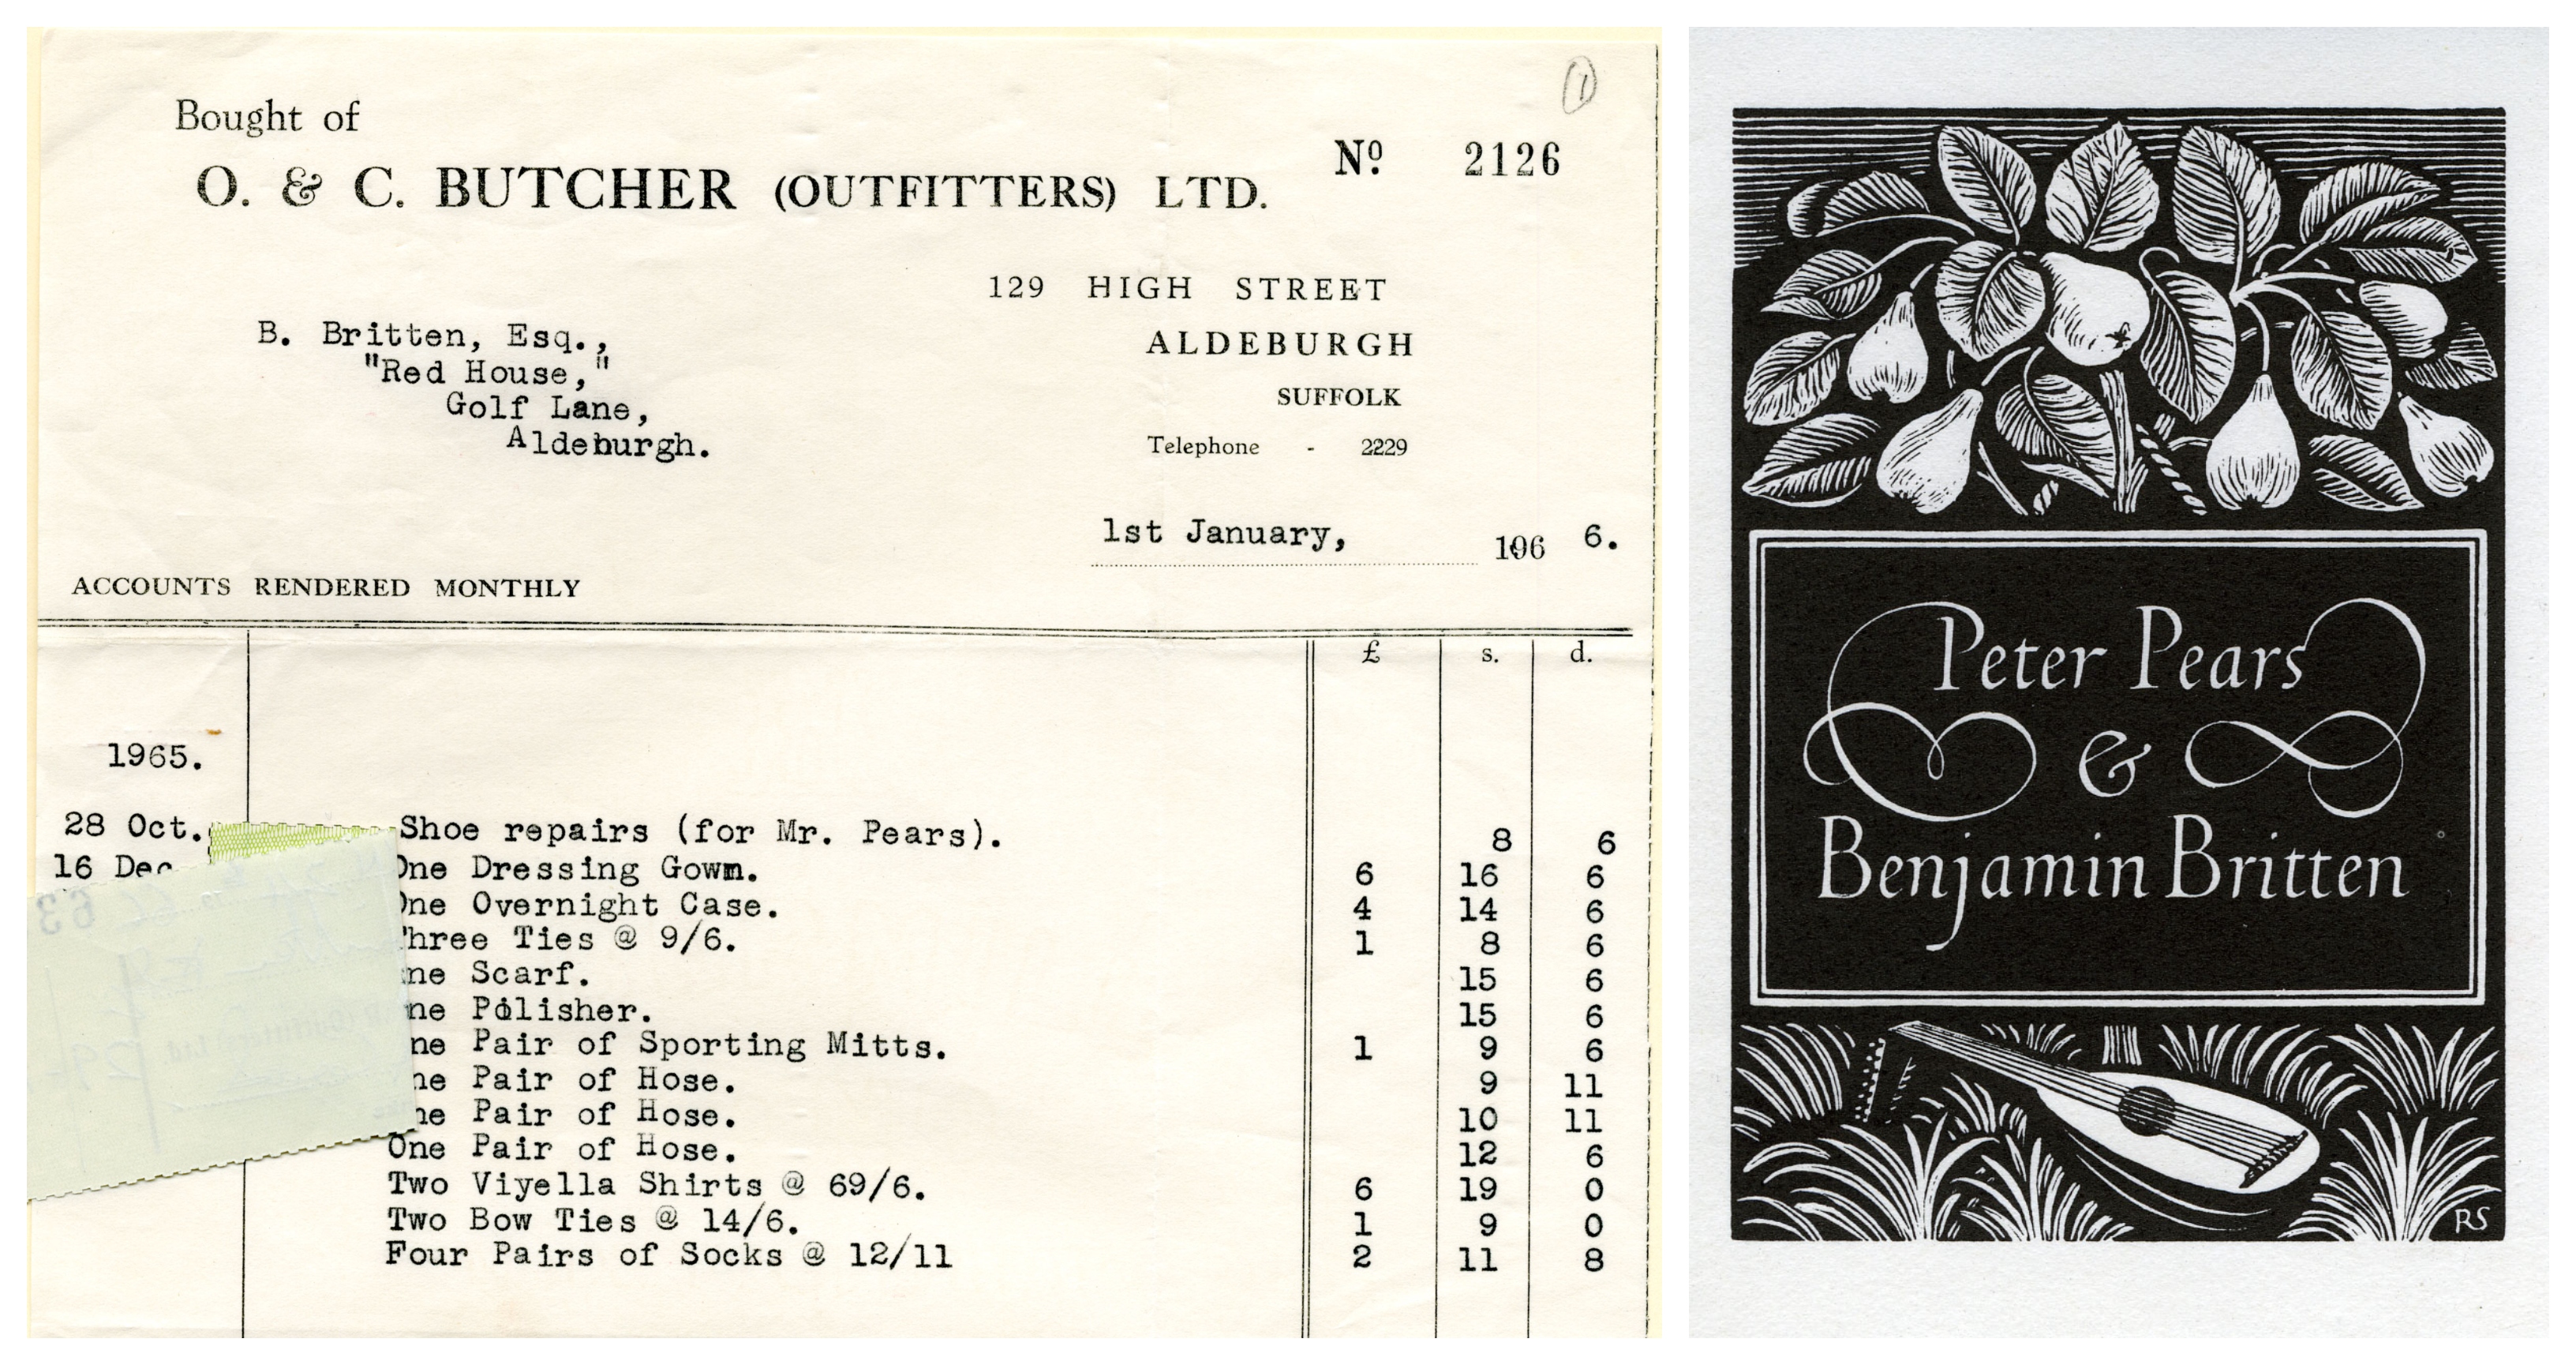 Printed receipt from clothing company and the frontispiece of a book with monochrome illustrations of a lyre and pears.